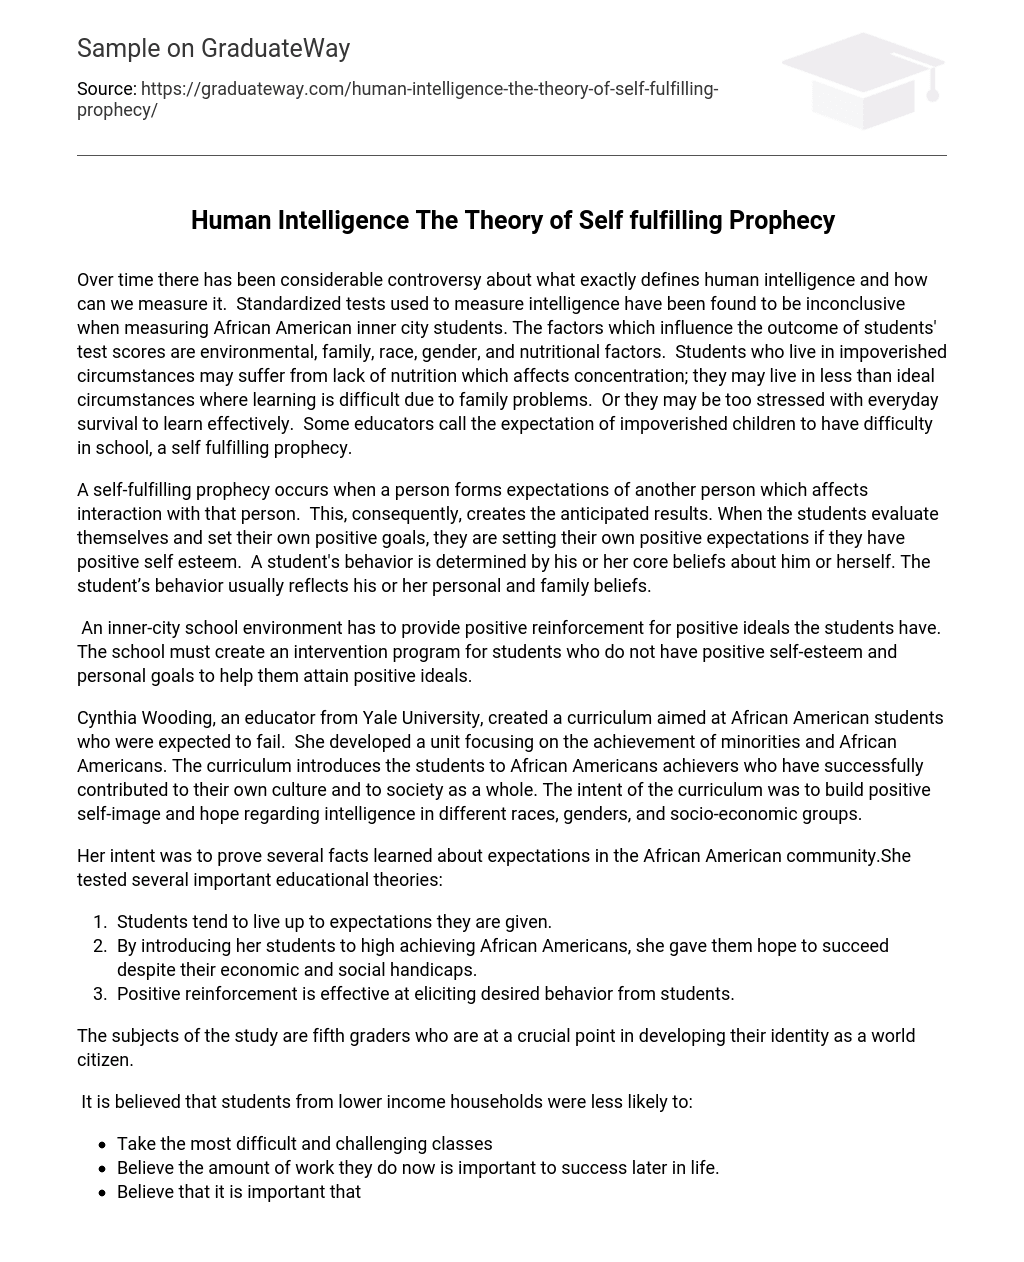 Human Intelligence The Theory of Self fulfilling Prophecy